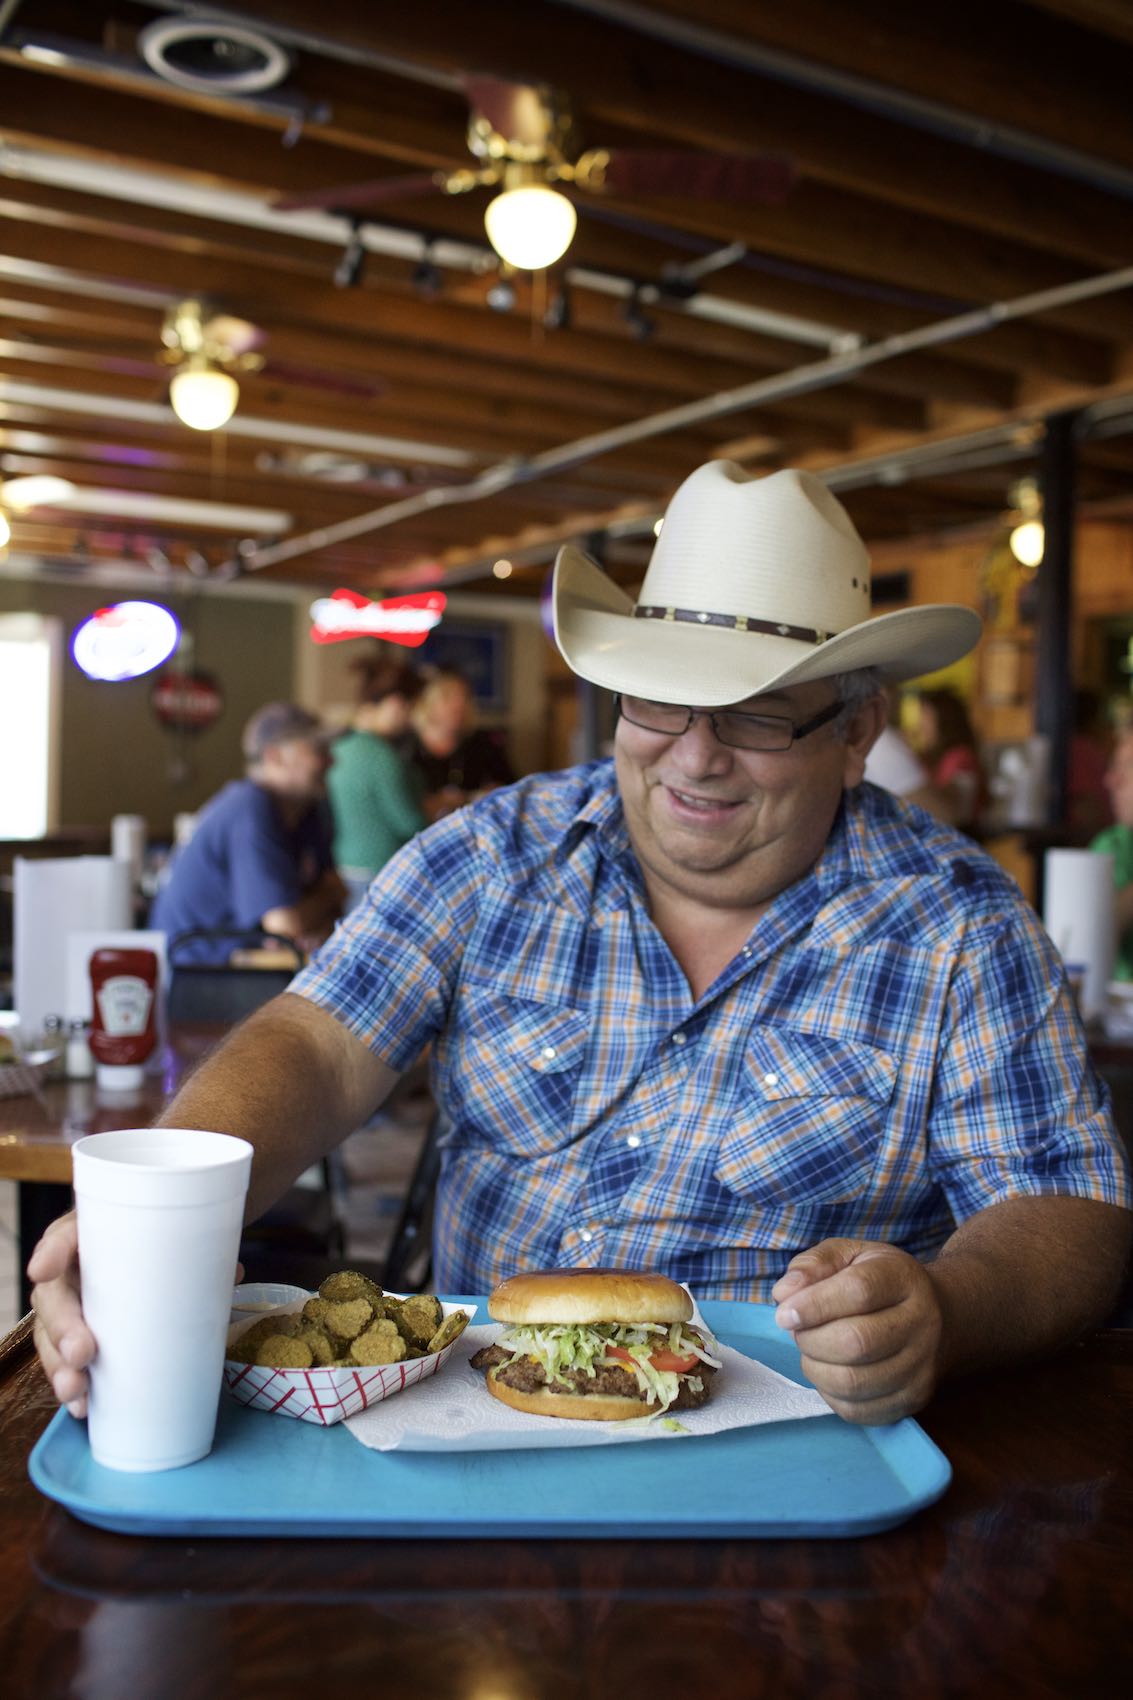 Jody Horton Photography - Man in cowboy hat eating a burger in roadhouse-like restaurant. 